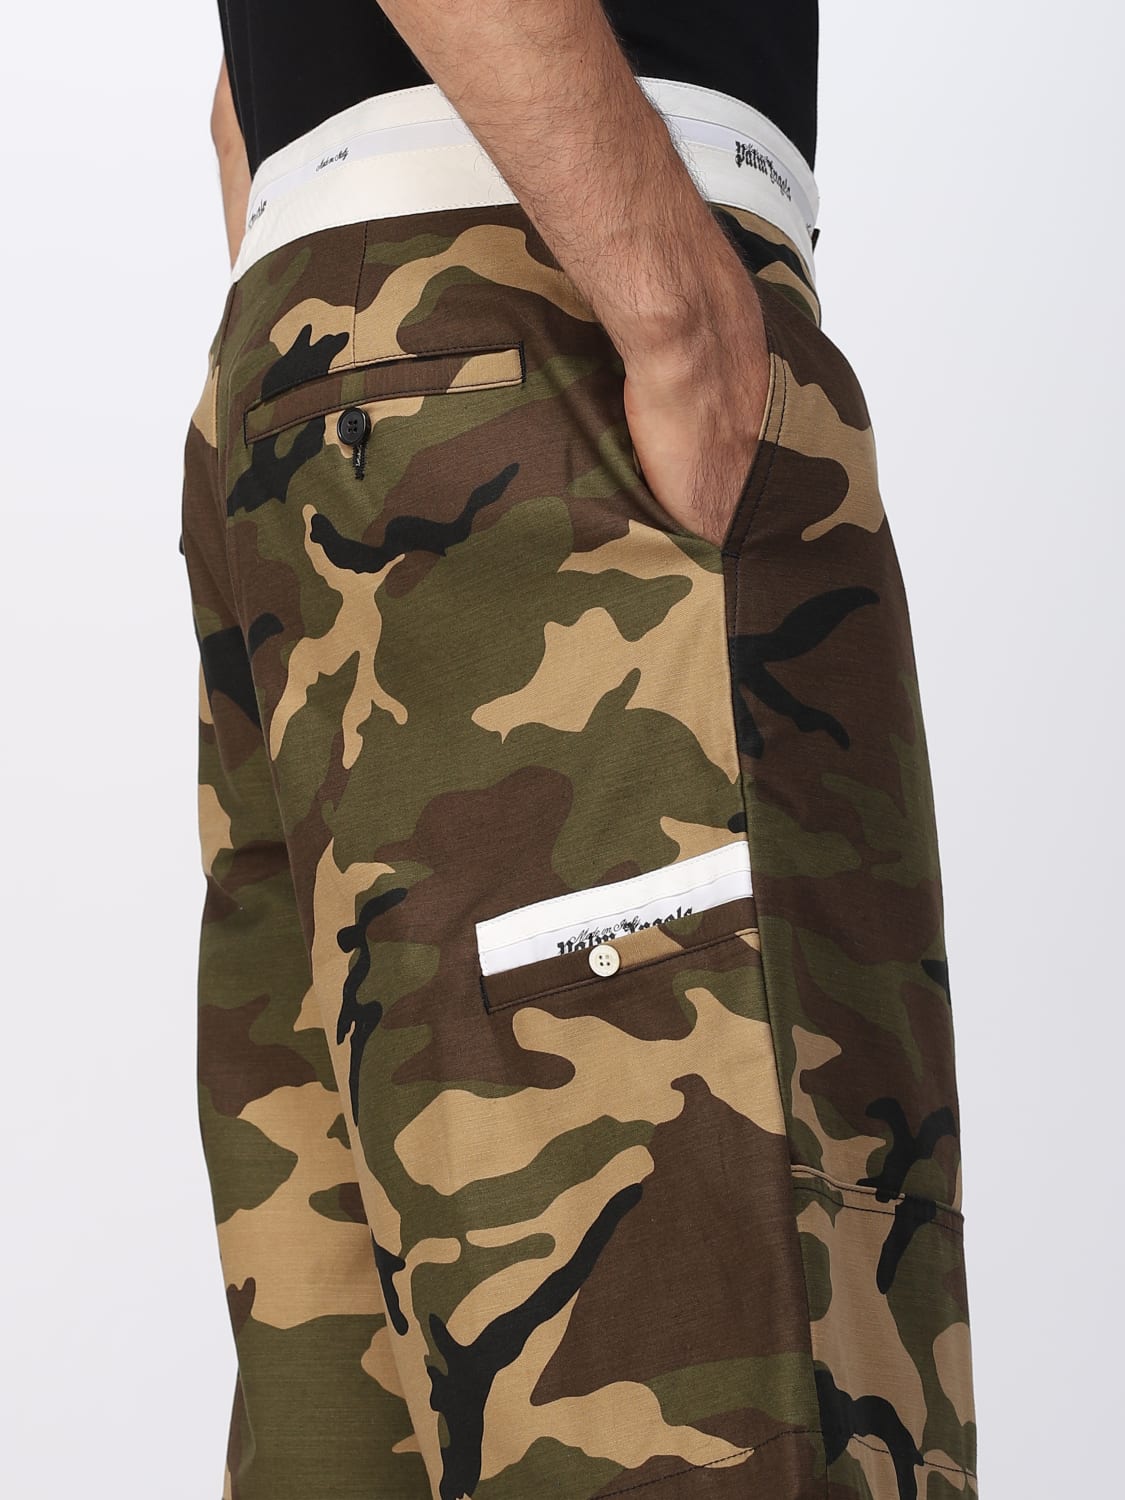 Palm Angels shorts in camouflage print cotton